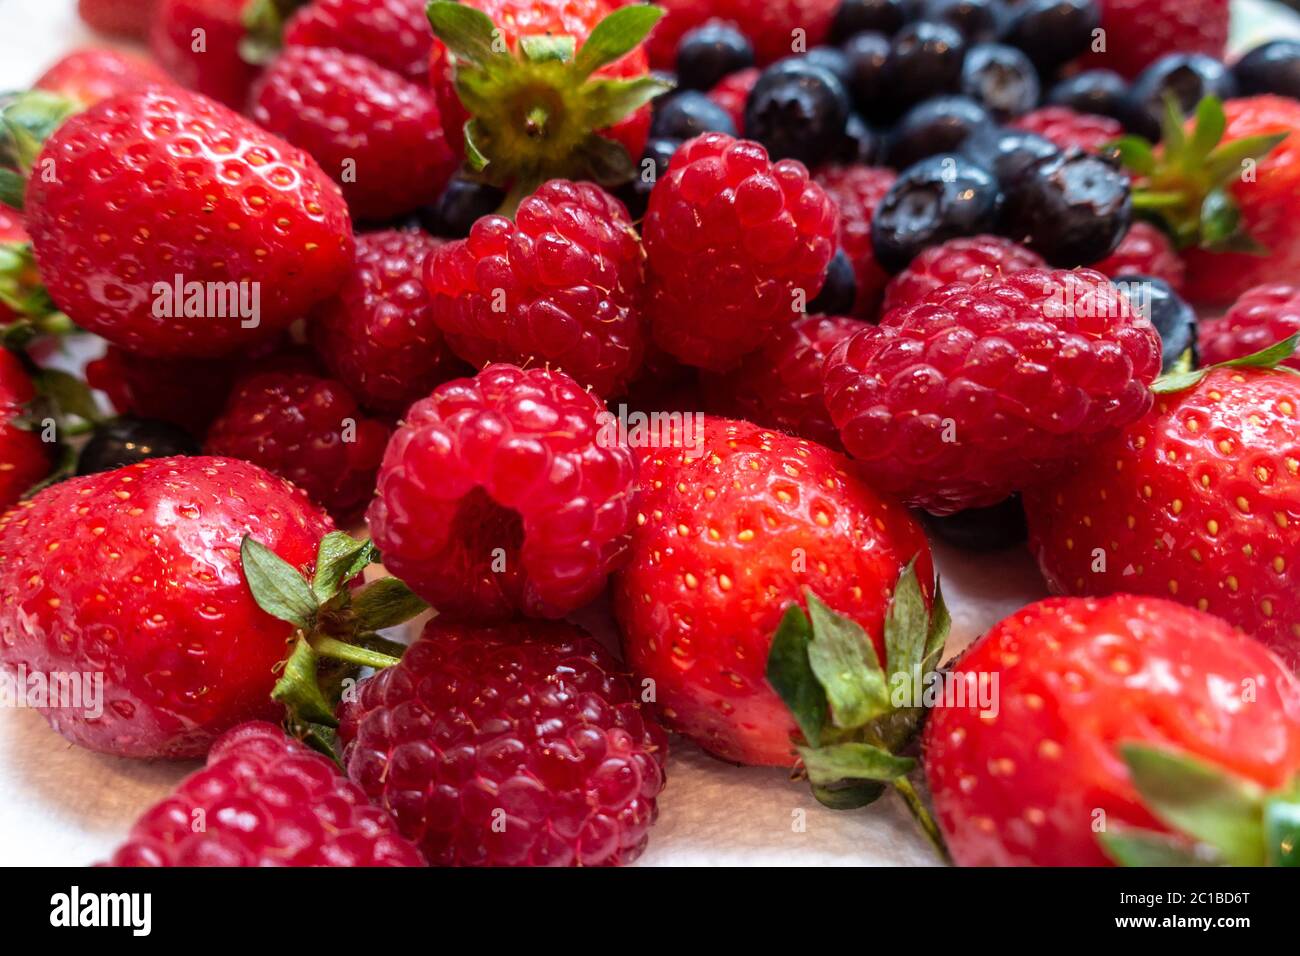 Close up view of soft summer fruits, strawberries, raspberries and blueberries. Stock Photo